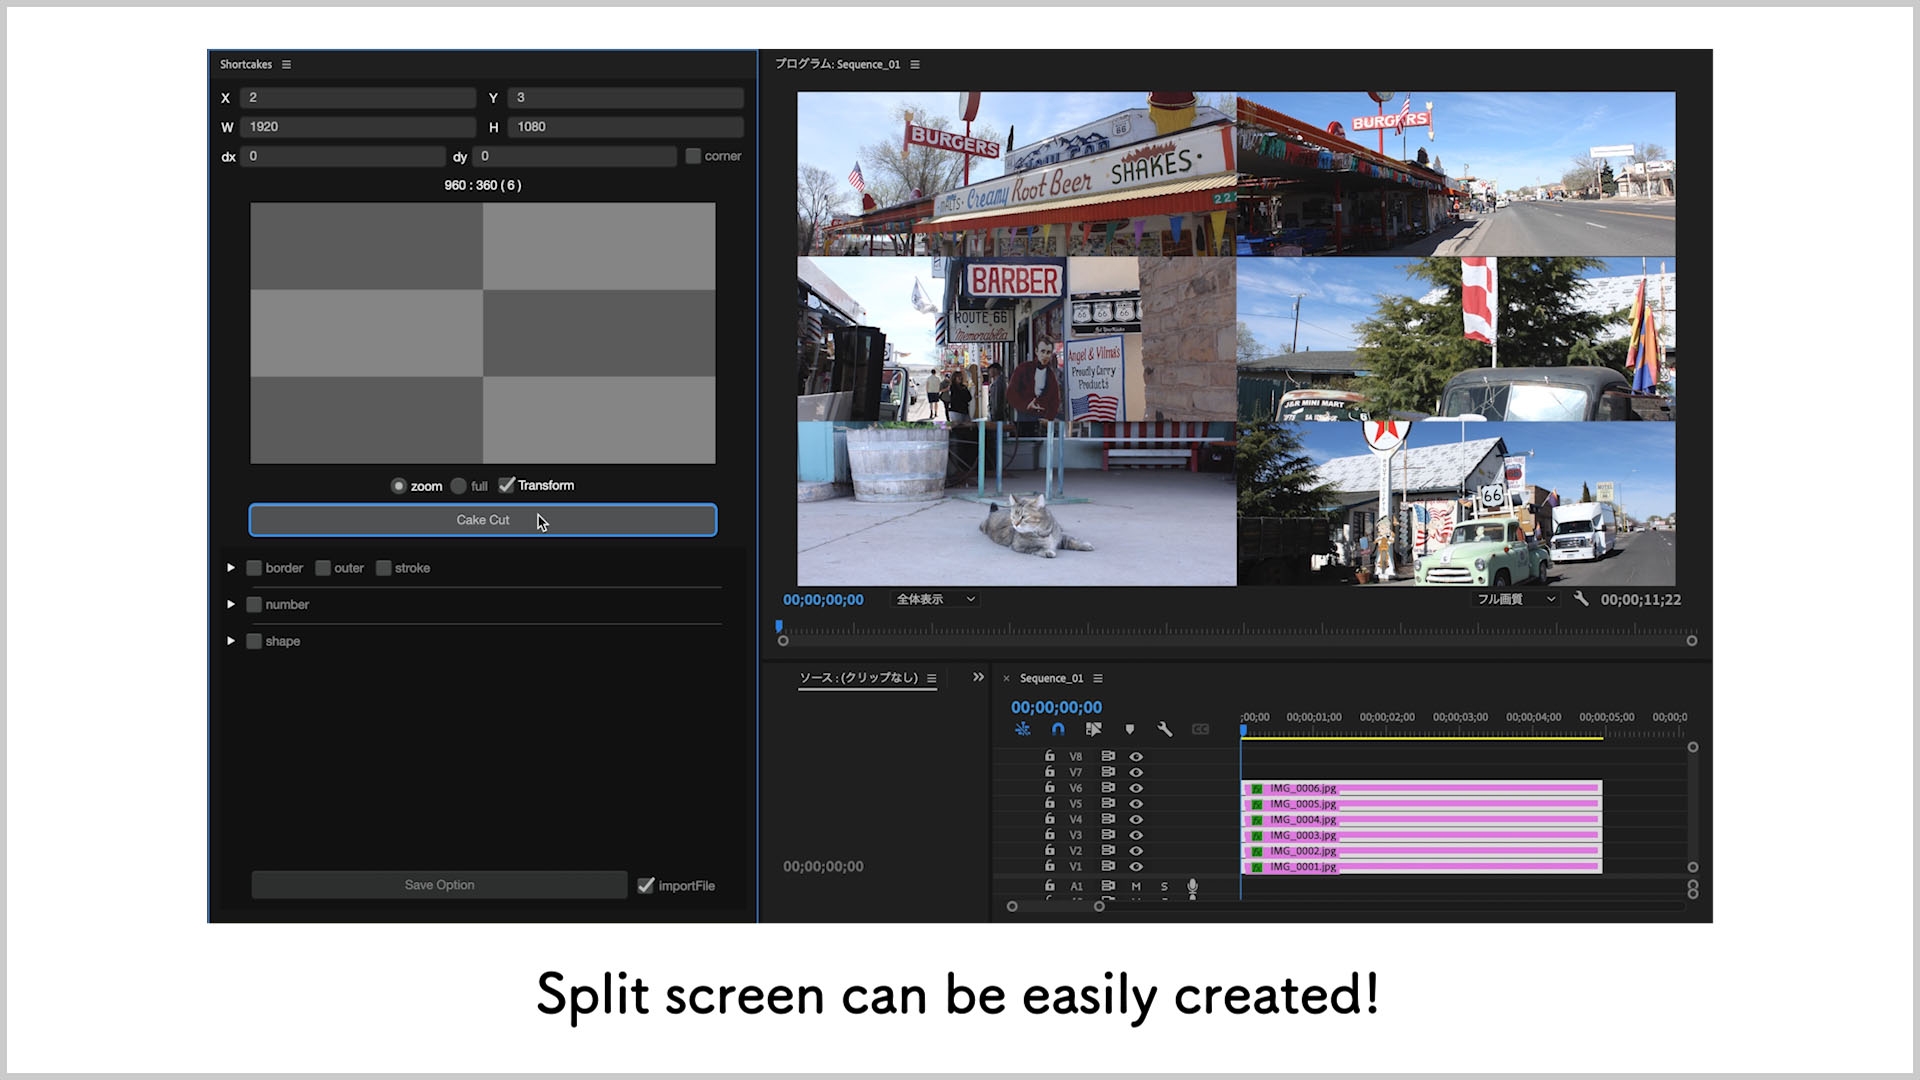 Split screen can be easily created!